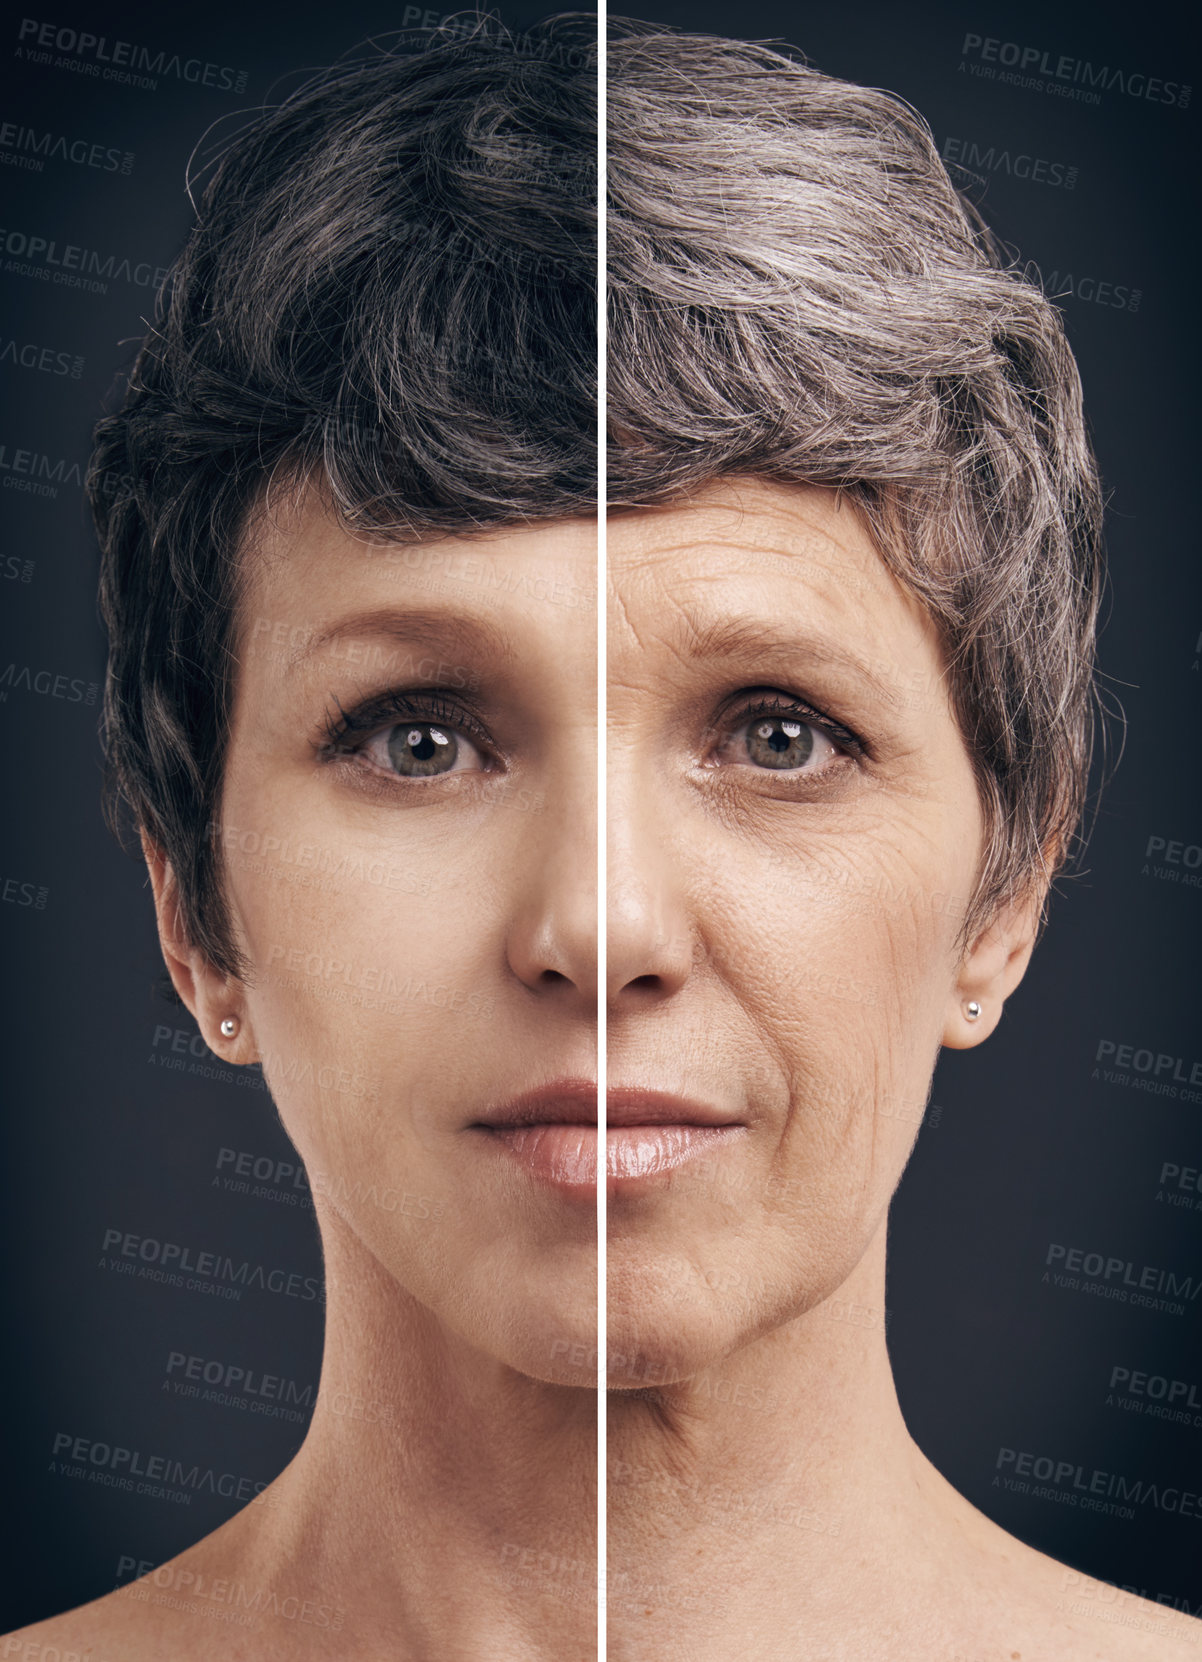 Buy stock photo Composite image of a woman when she was younger and older